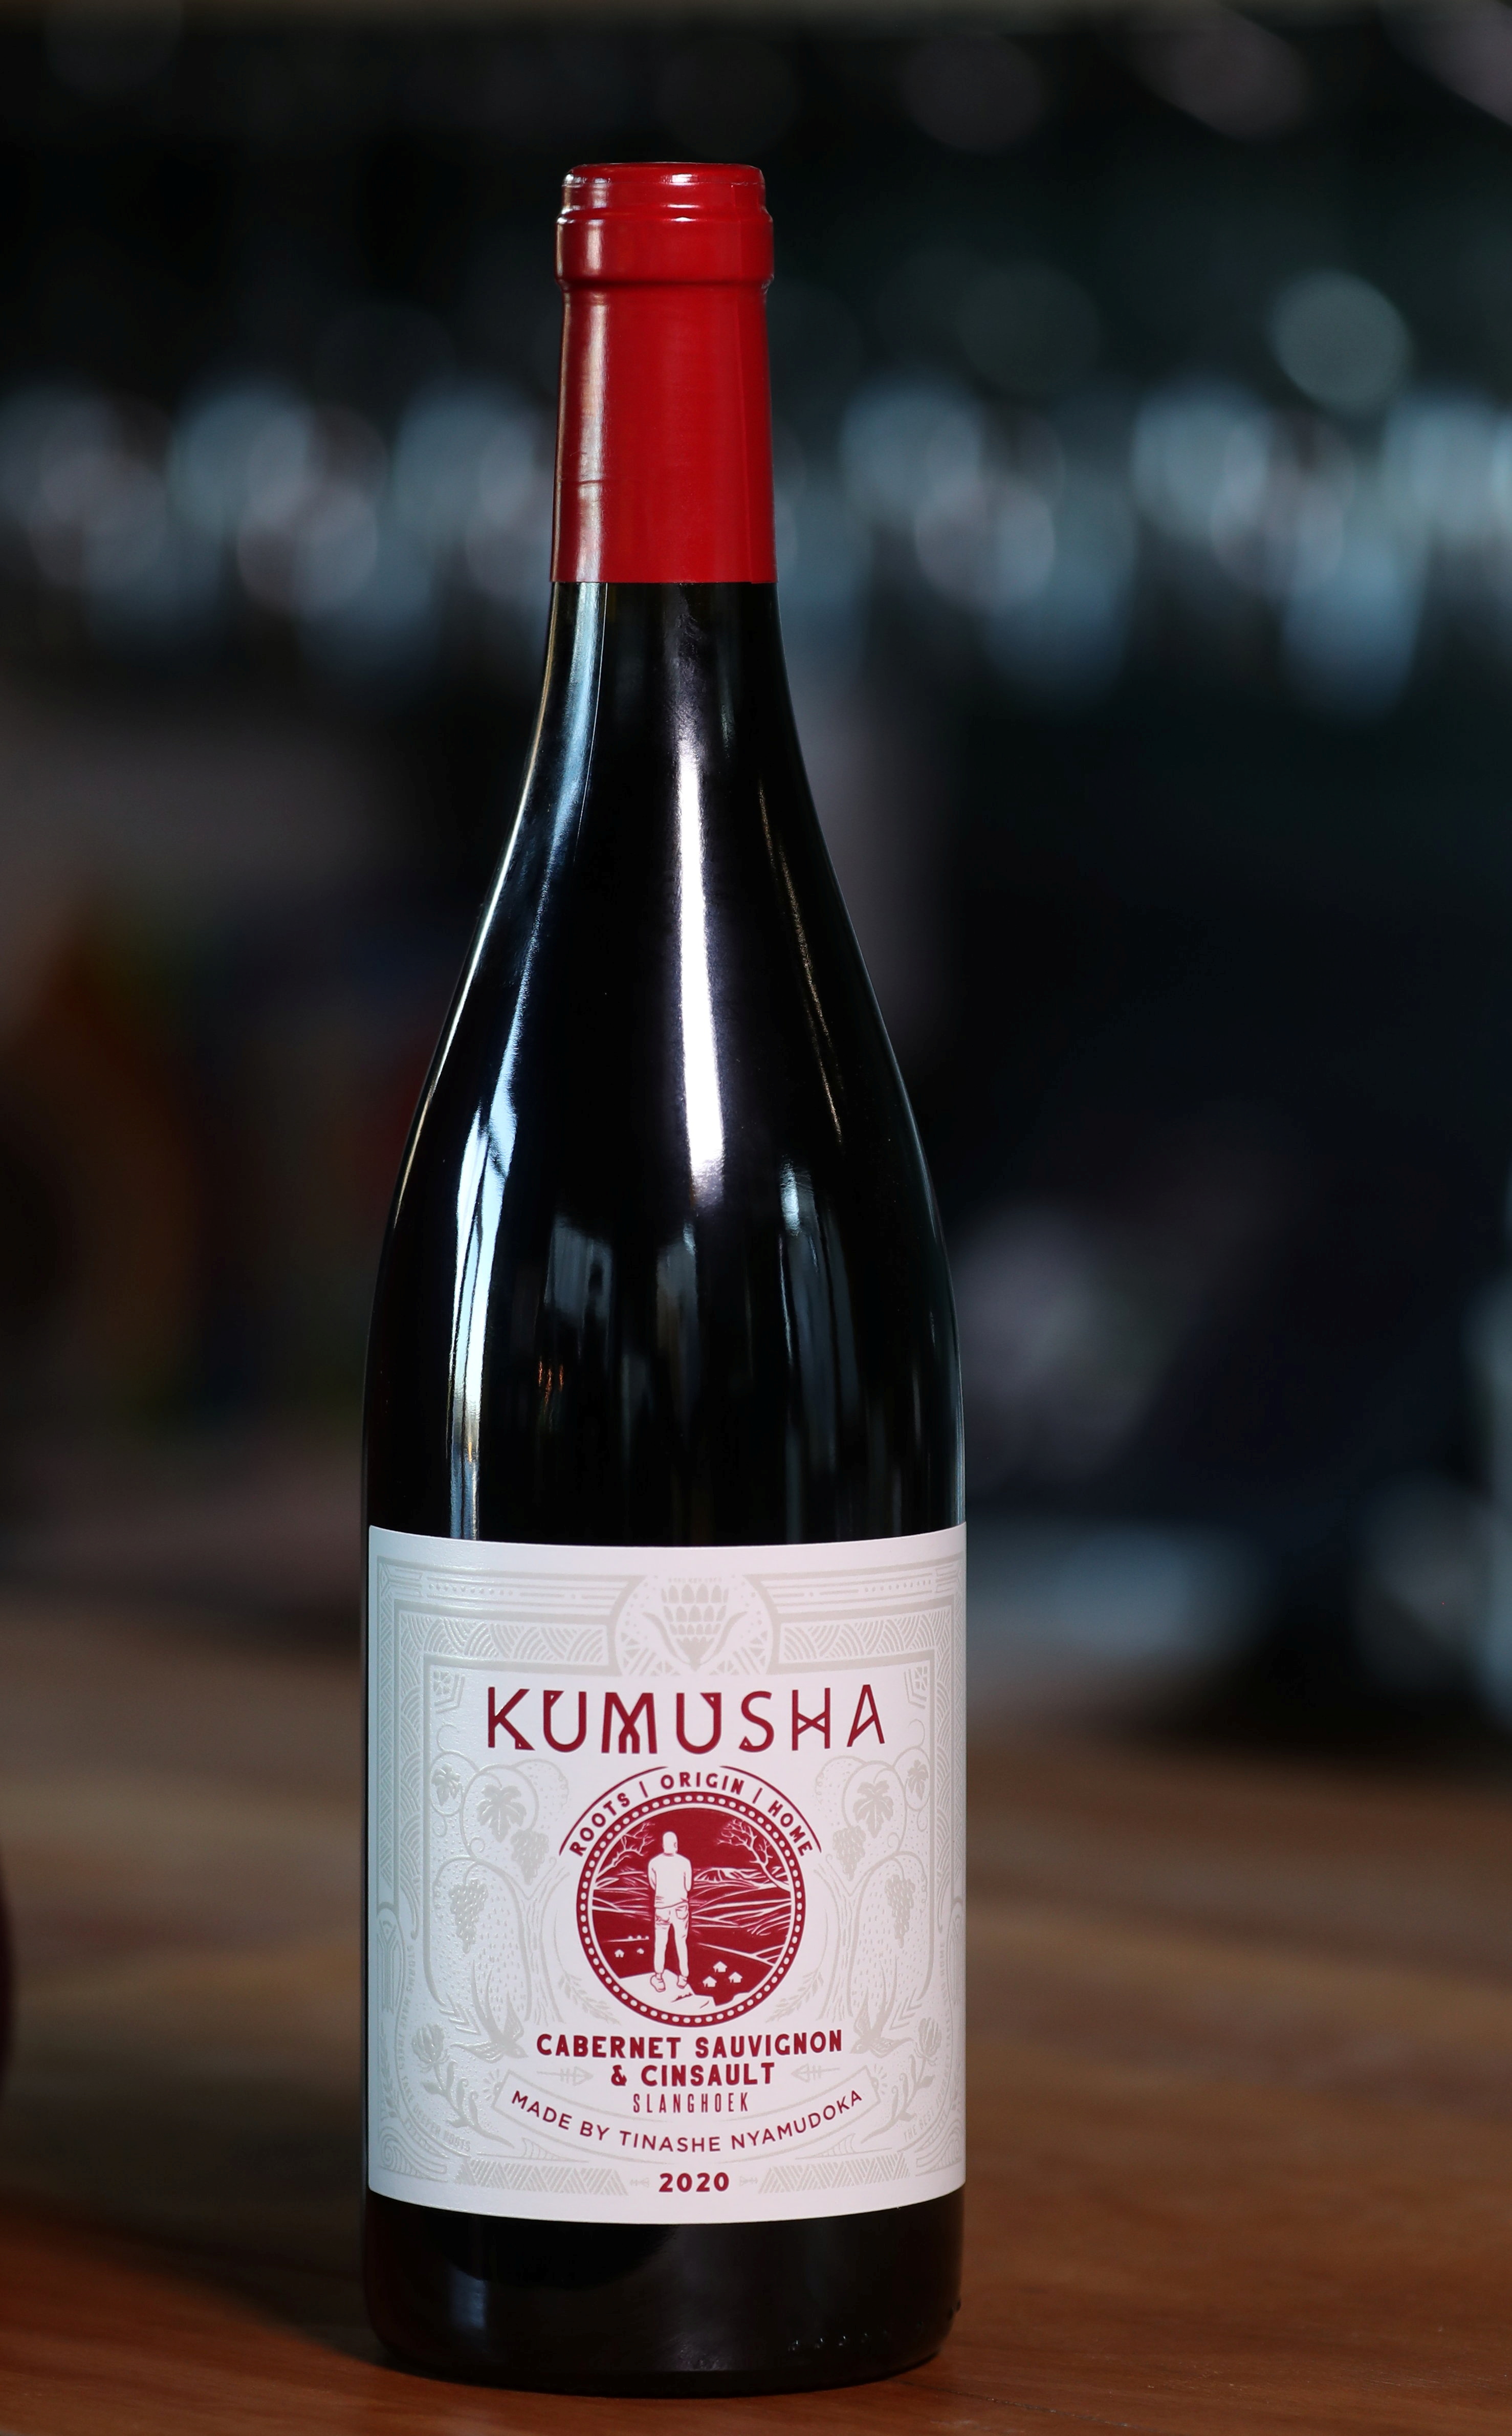 A bottle of Kumusha wine, a brand owned by Zimbabwean sommelier Tinashe Nyamudoka, is pictured in Johannesburg, South Africa, June 25, 2021. REUTERS/Siphiwe Sibeko